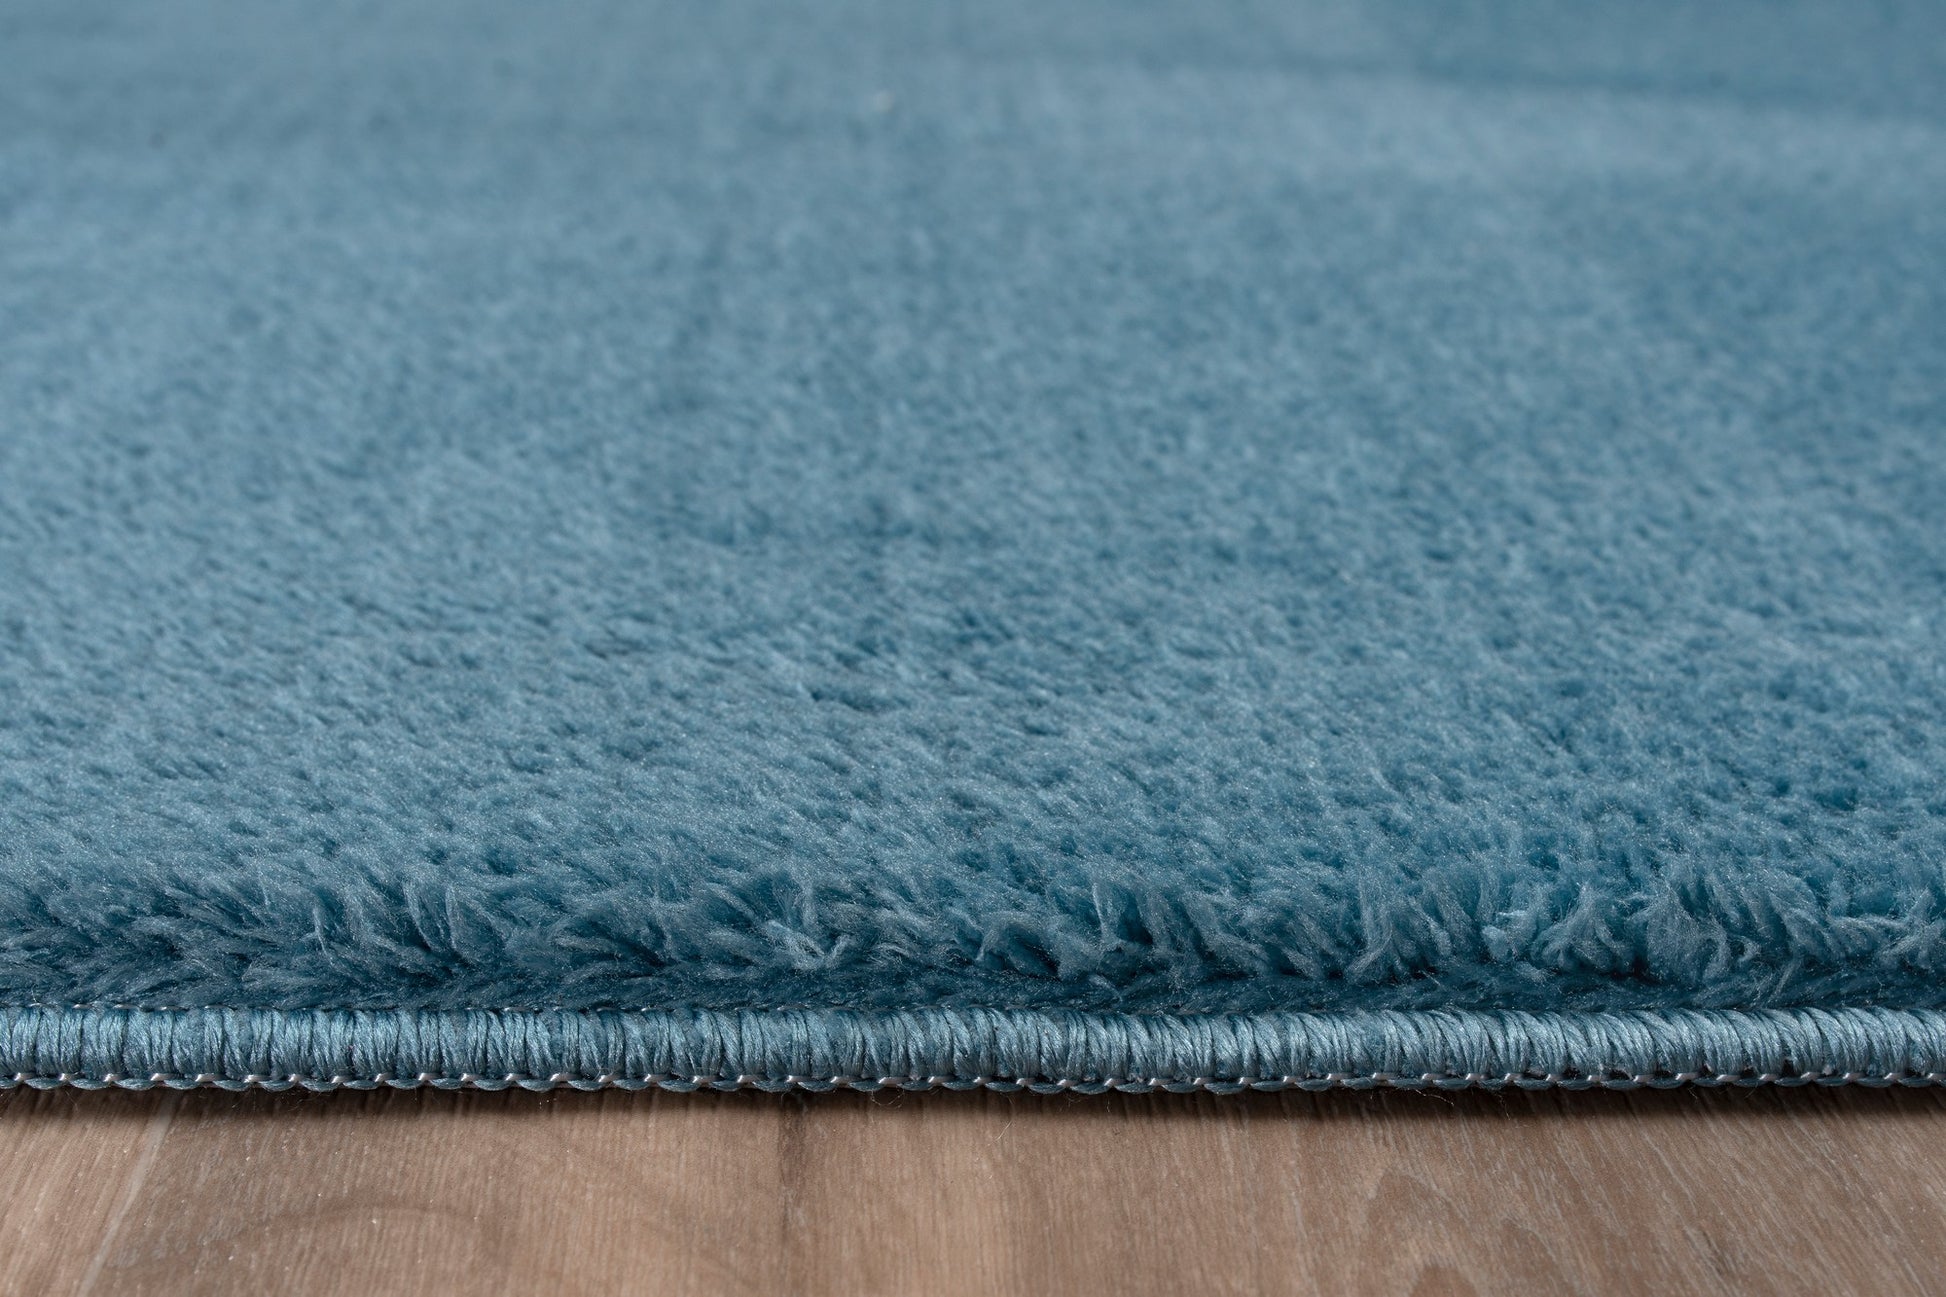 blue fluffy soft machine washable area rug for living room bedroom 2x8, 3x10, 2x10 ft Long Runner Rug, Hallway, Balcony, Entry Way, Kitchen, Stairs